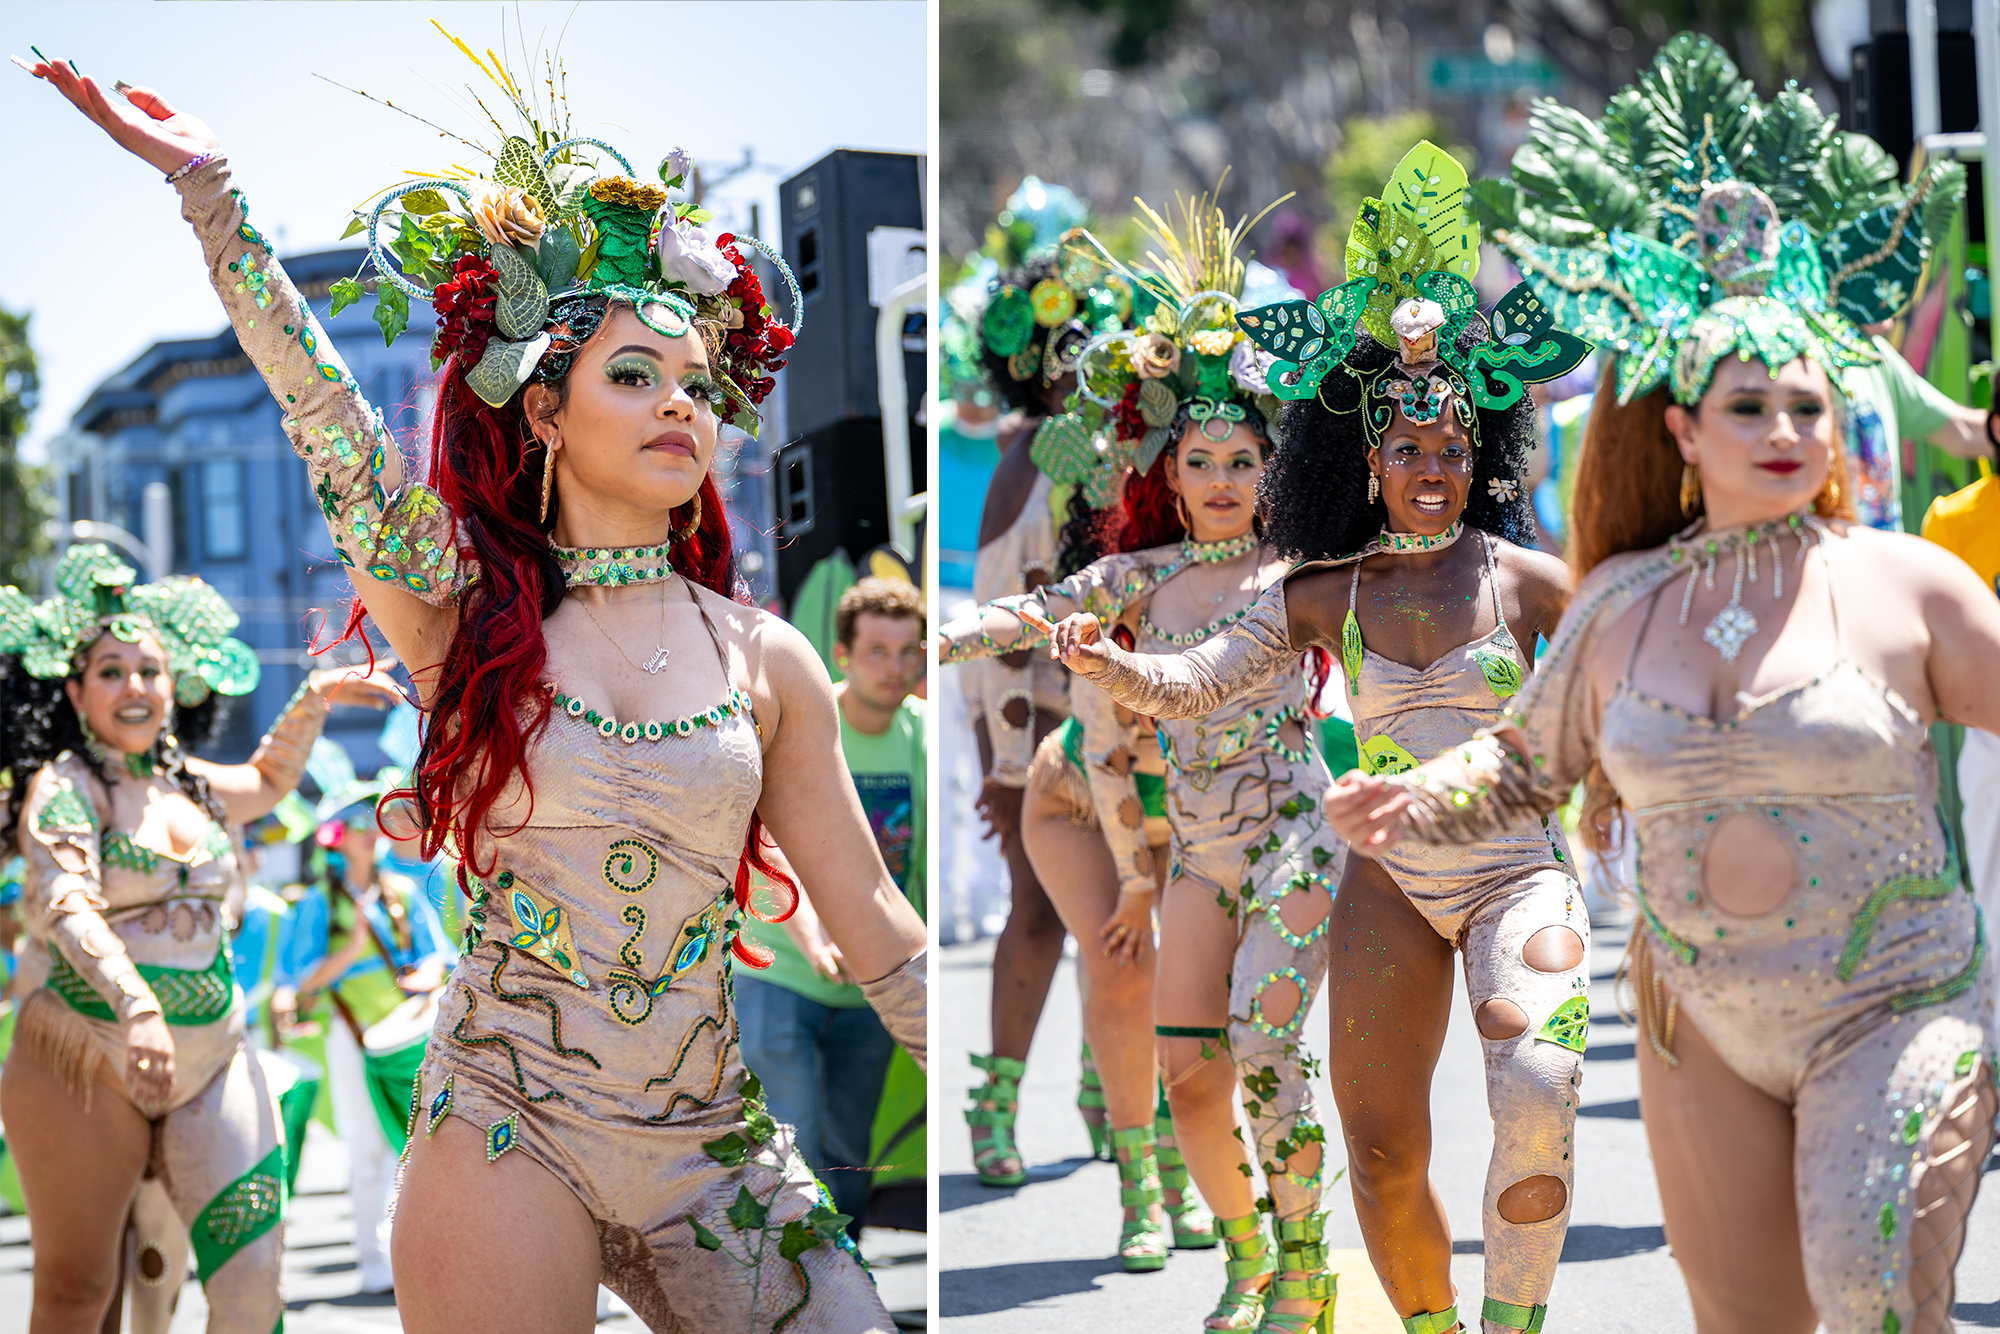 Side-by-side images of women dressed in elaborate attire for a parade.